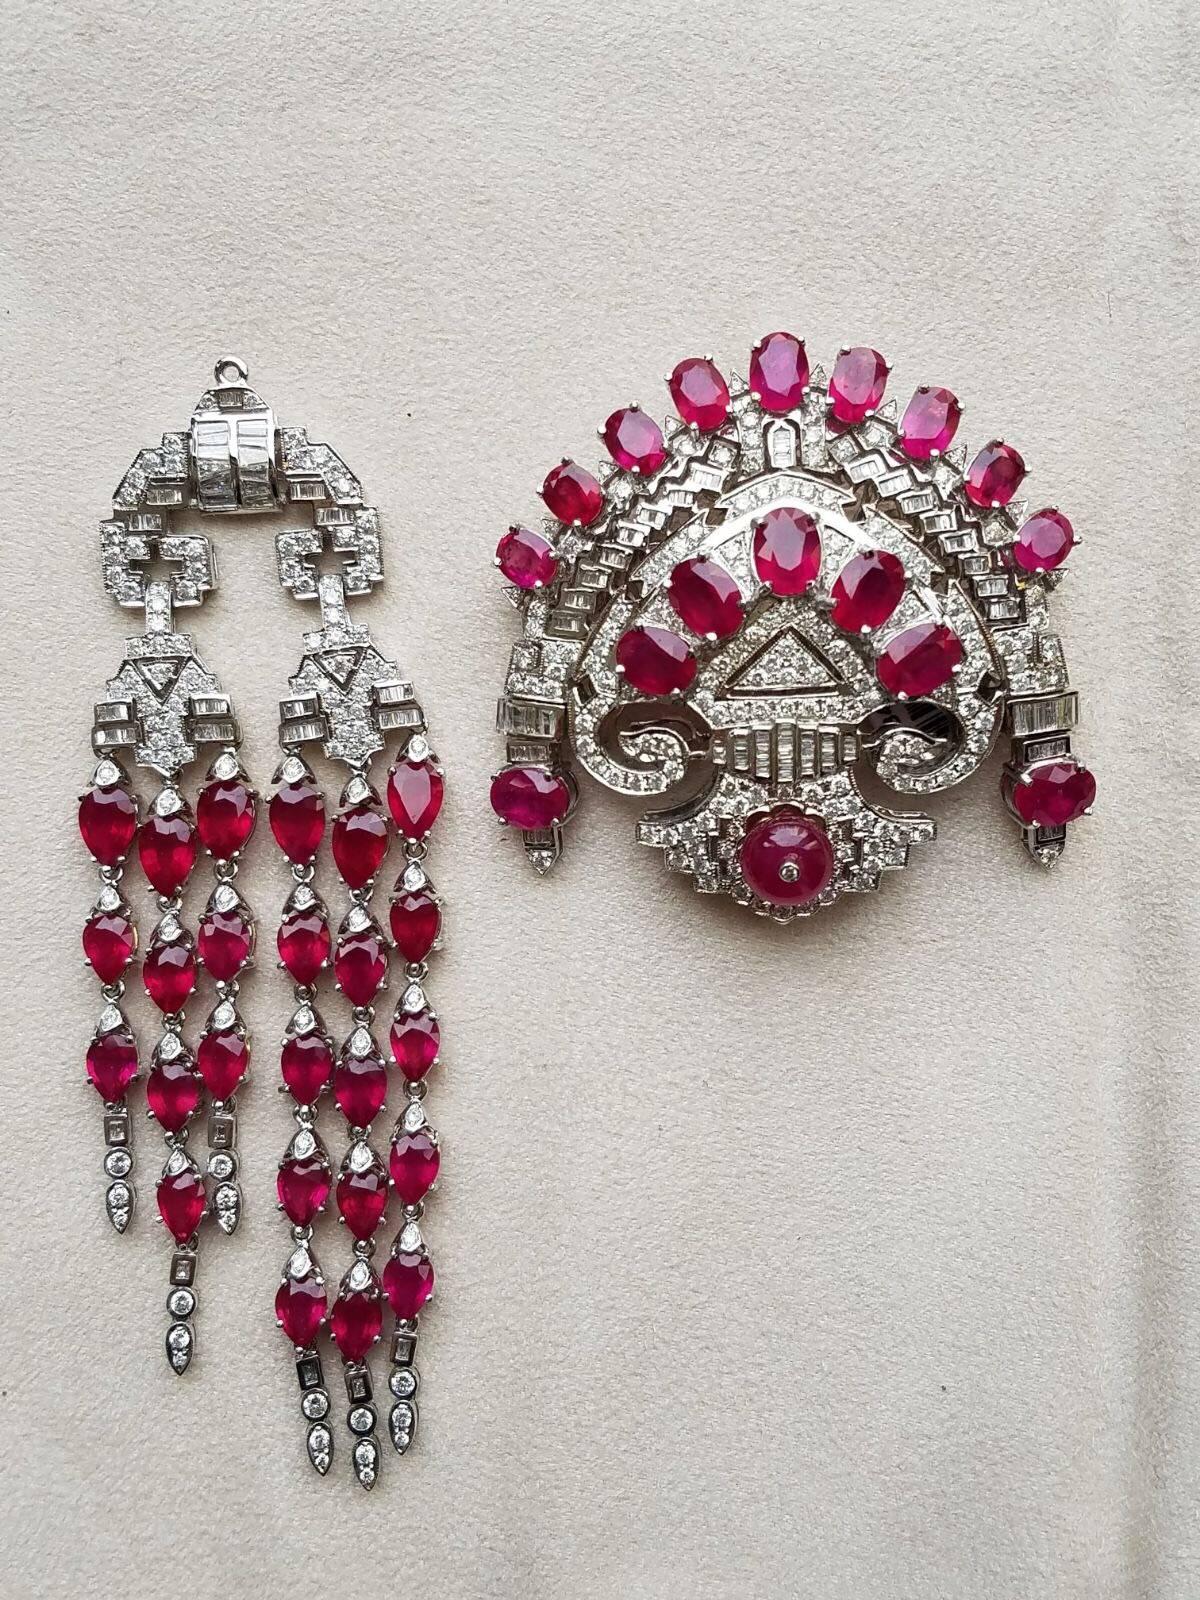 A stunning, art-deco looking clip brooch/pendant, consisting of Mozambique rubies and Diamonds. The dangling, bottom half of the item is detachable (as seen in photos). 

Stone Details:
Stone: Mozambique Ruby
Cut: Oval / bead
Weight: 53.64